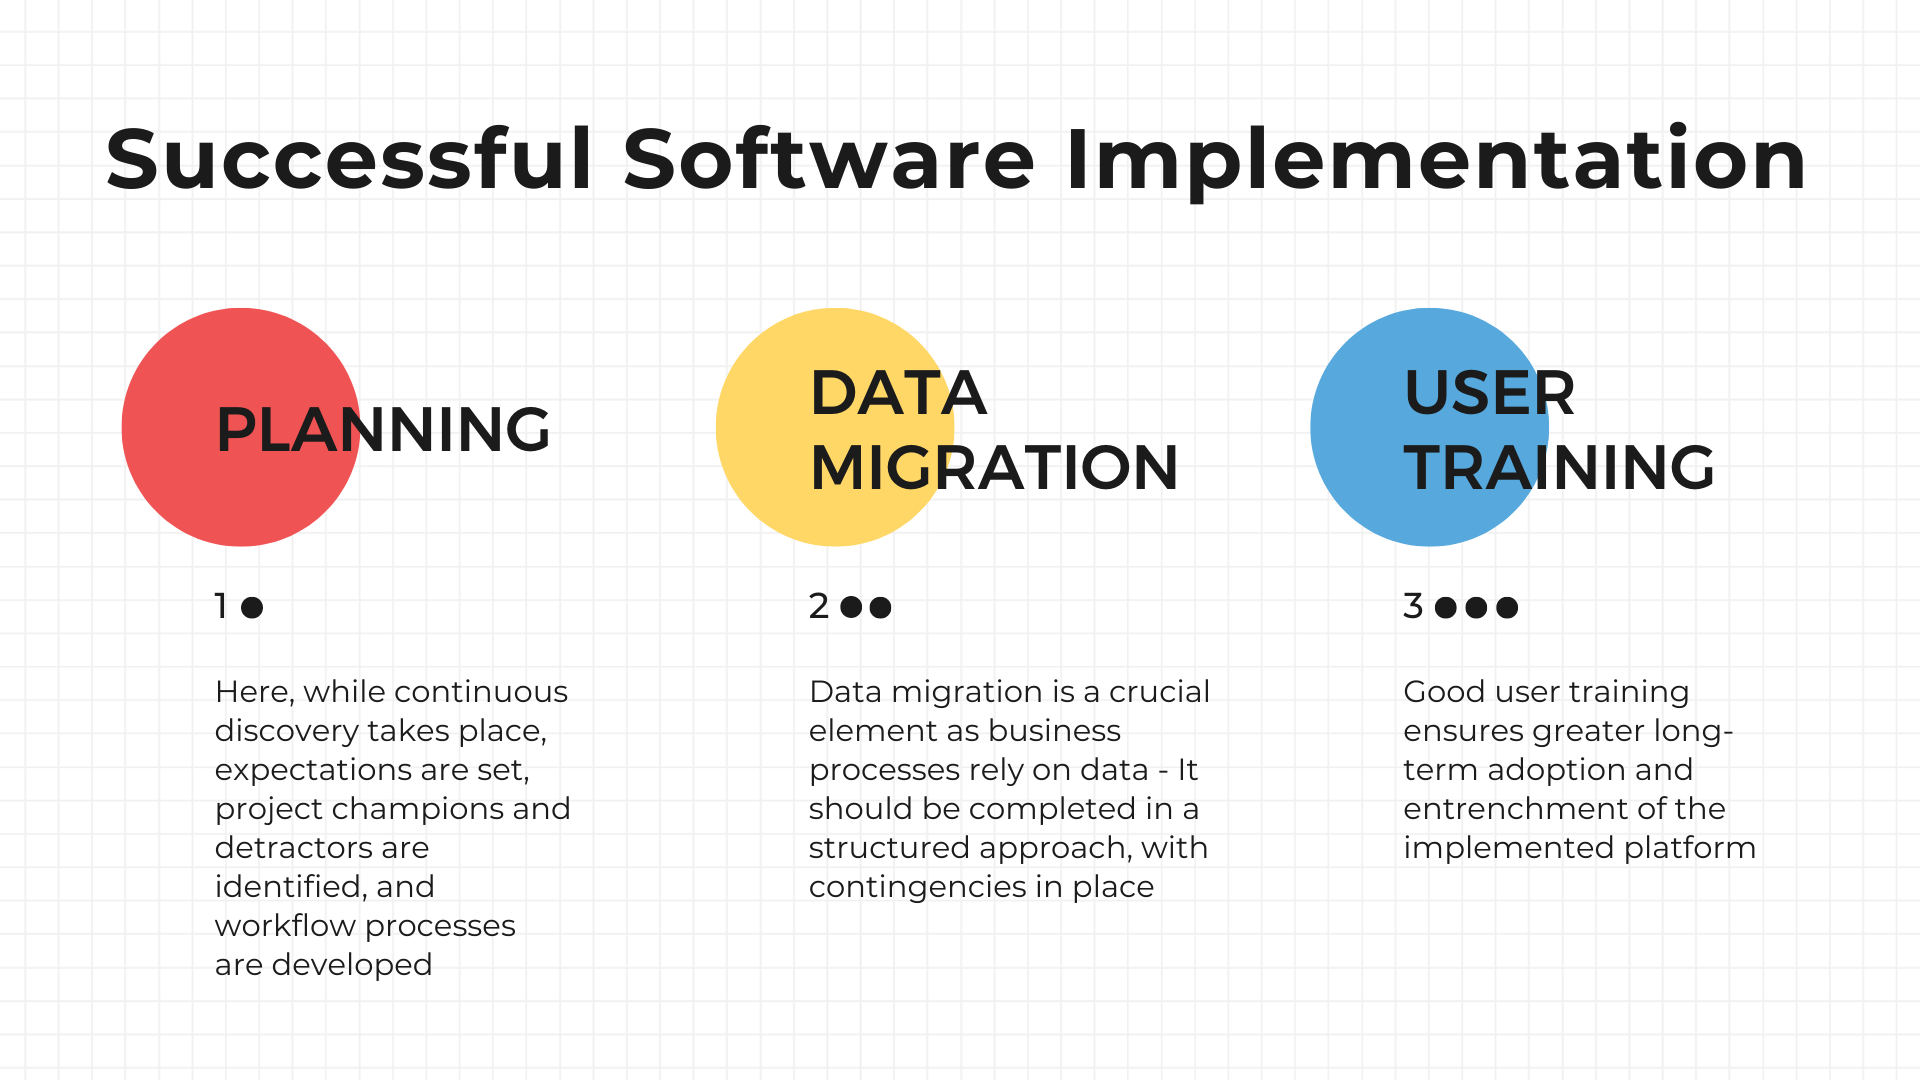 CURA - Top 3 Tips for Successful Software Implementation